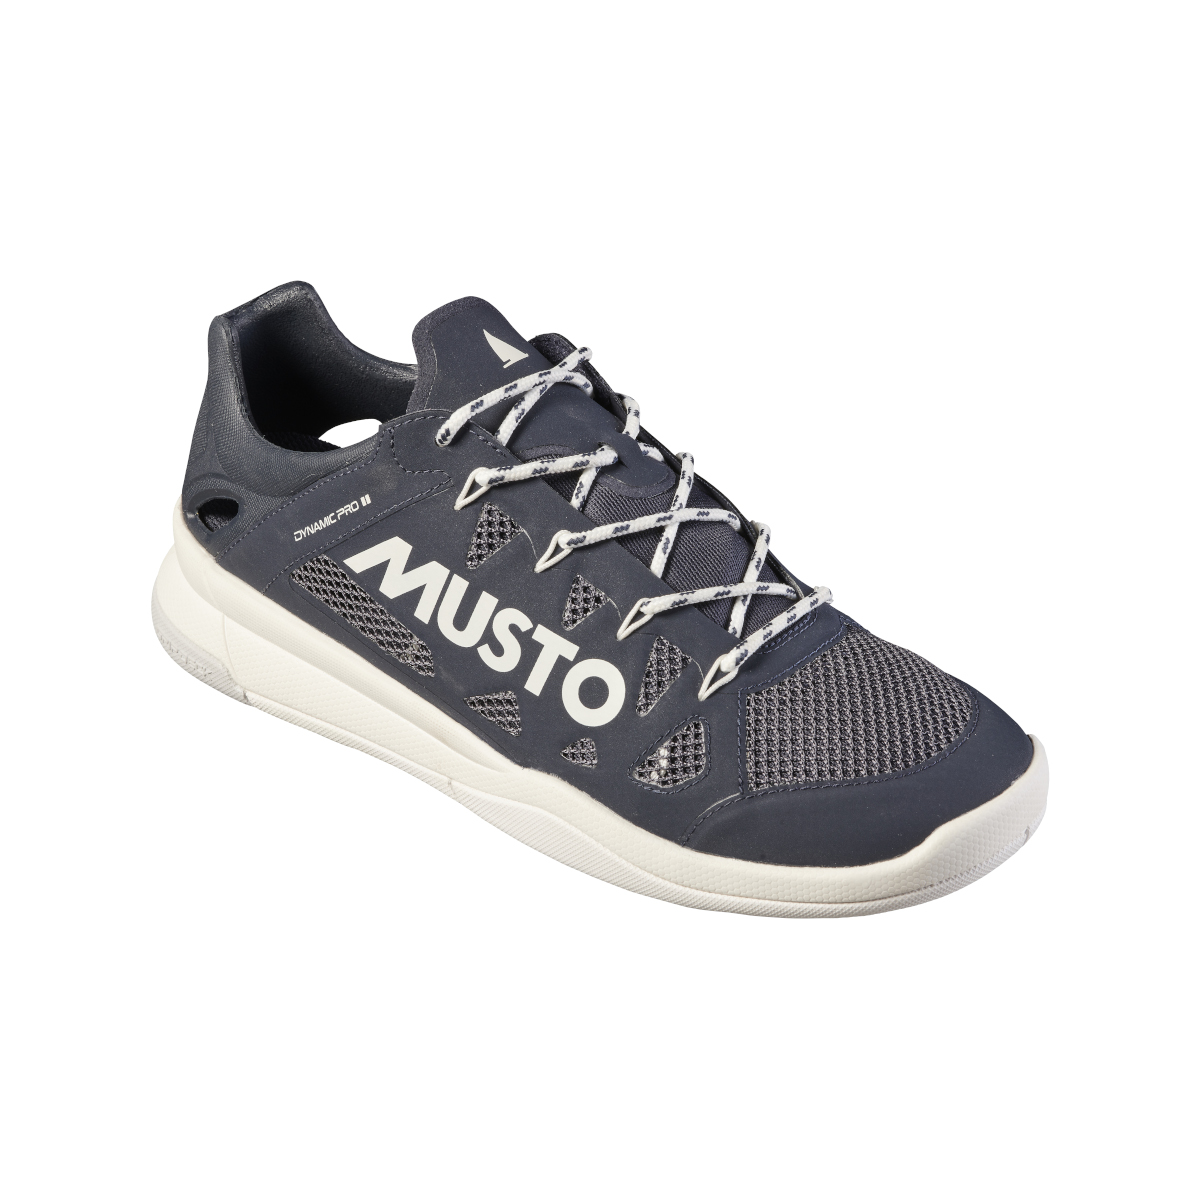 Musto Dynamic Pro II chaussures de voile homme bleu marine, taille 43